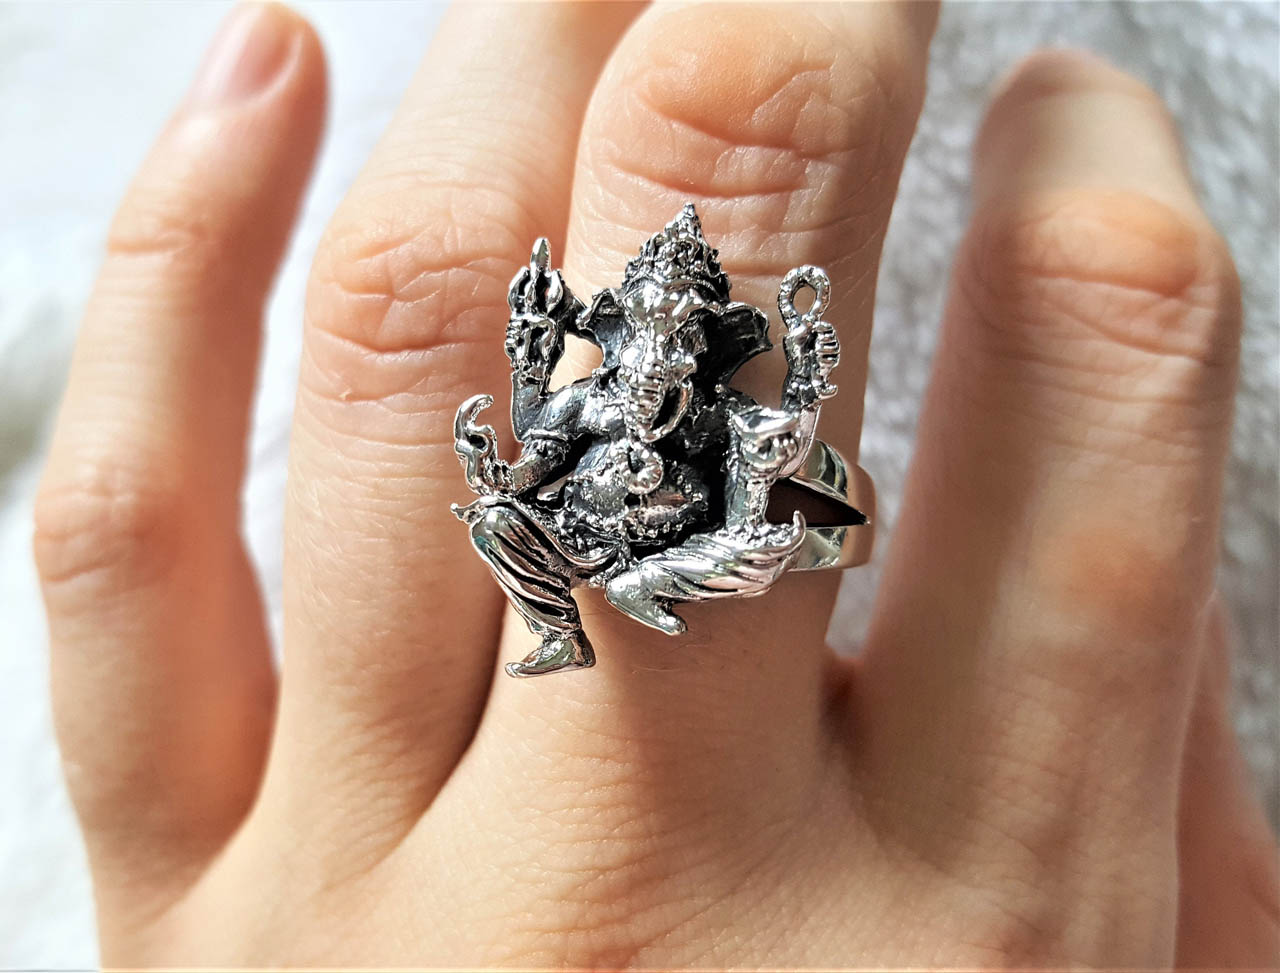 Silver Ring with Hand Painted Ganesha Motif Design 2 - Desically Ethnic